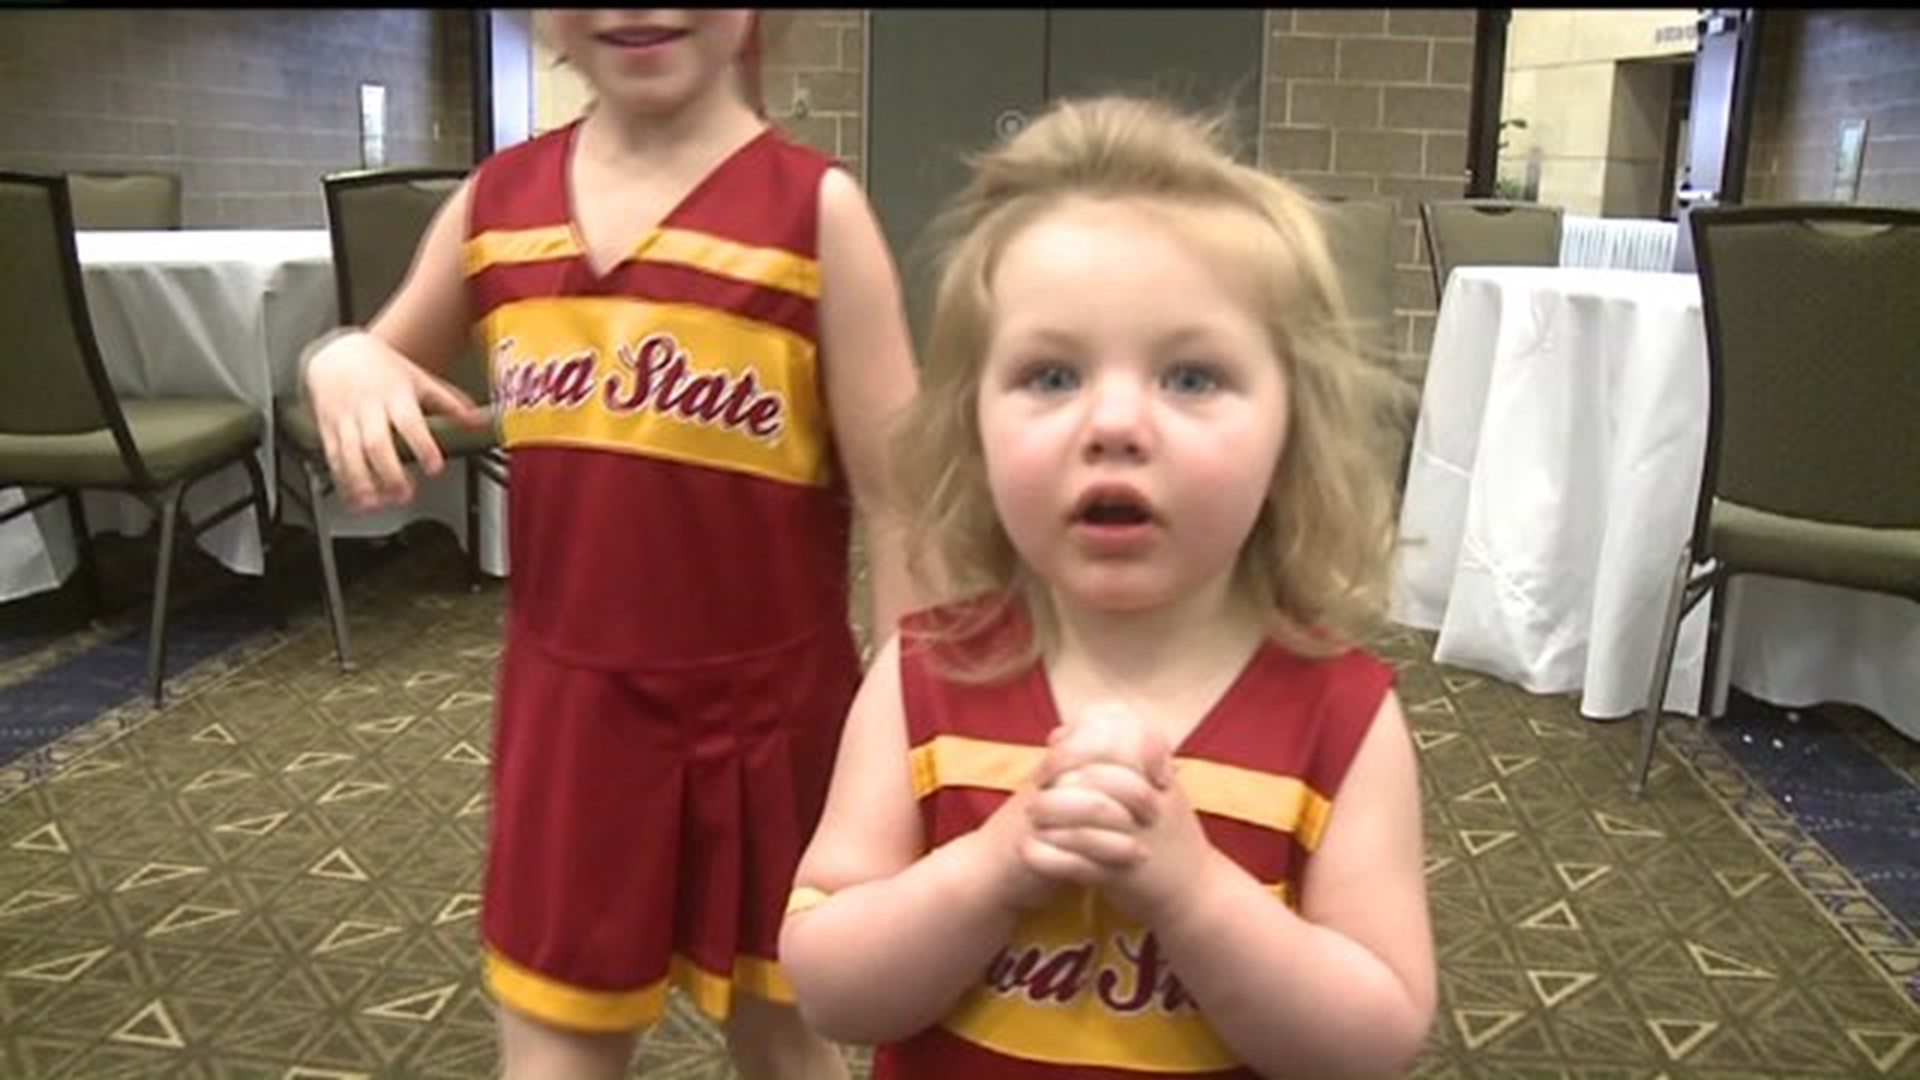 Cyclone Tailgate Tour stops in QC